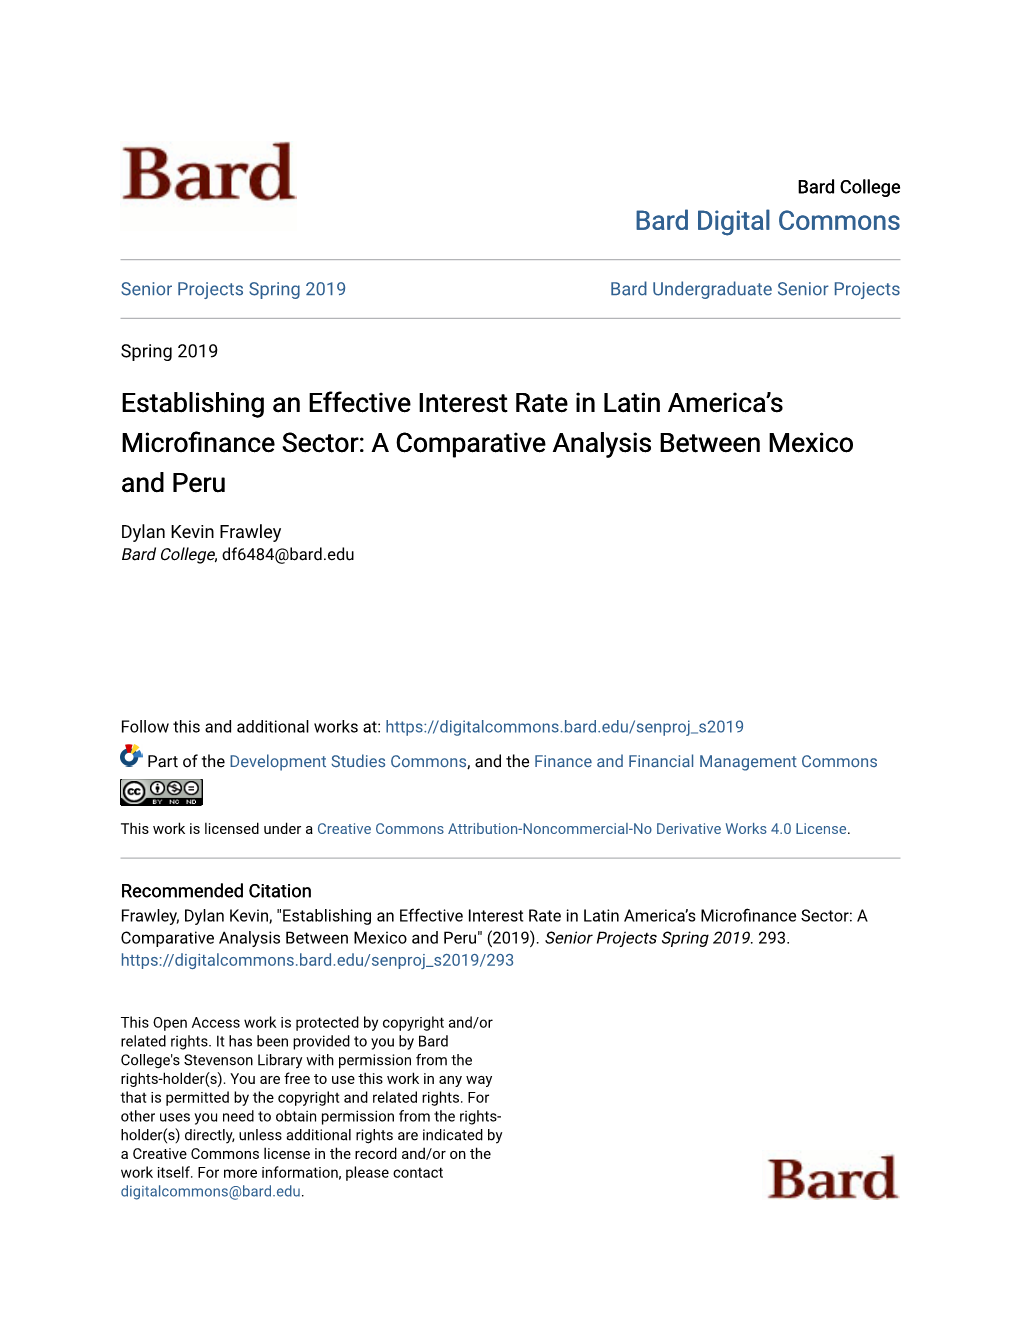 Establishing an Effective Interest Rate in Latin Americaâ•Žs Microfinance Sector: a Comparative Analysis Between Mexico